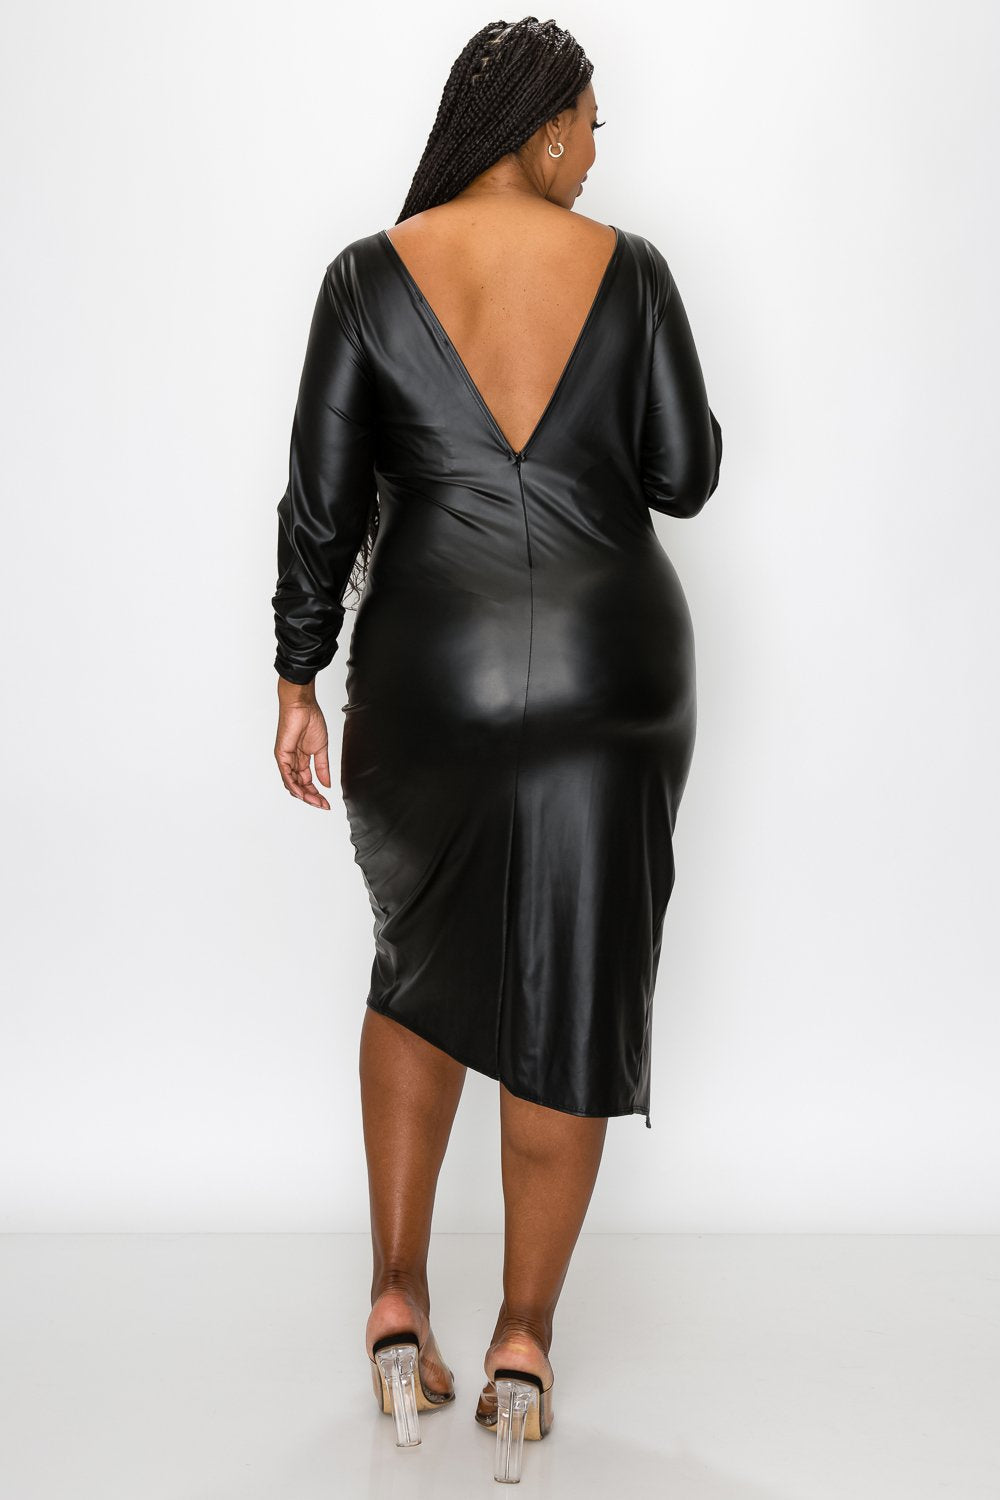 livd L I V D women's trendy plus size fashion contemporary faux leather ruched sleeves with open back and leg slit in black made in USA